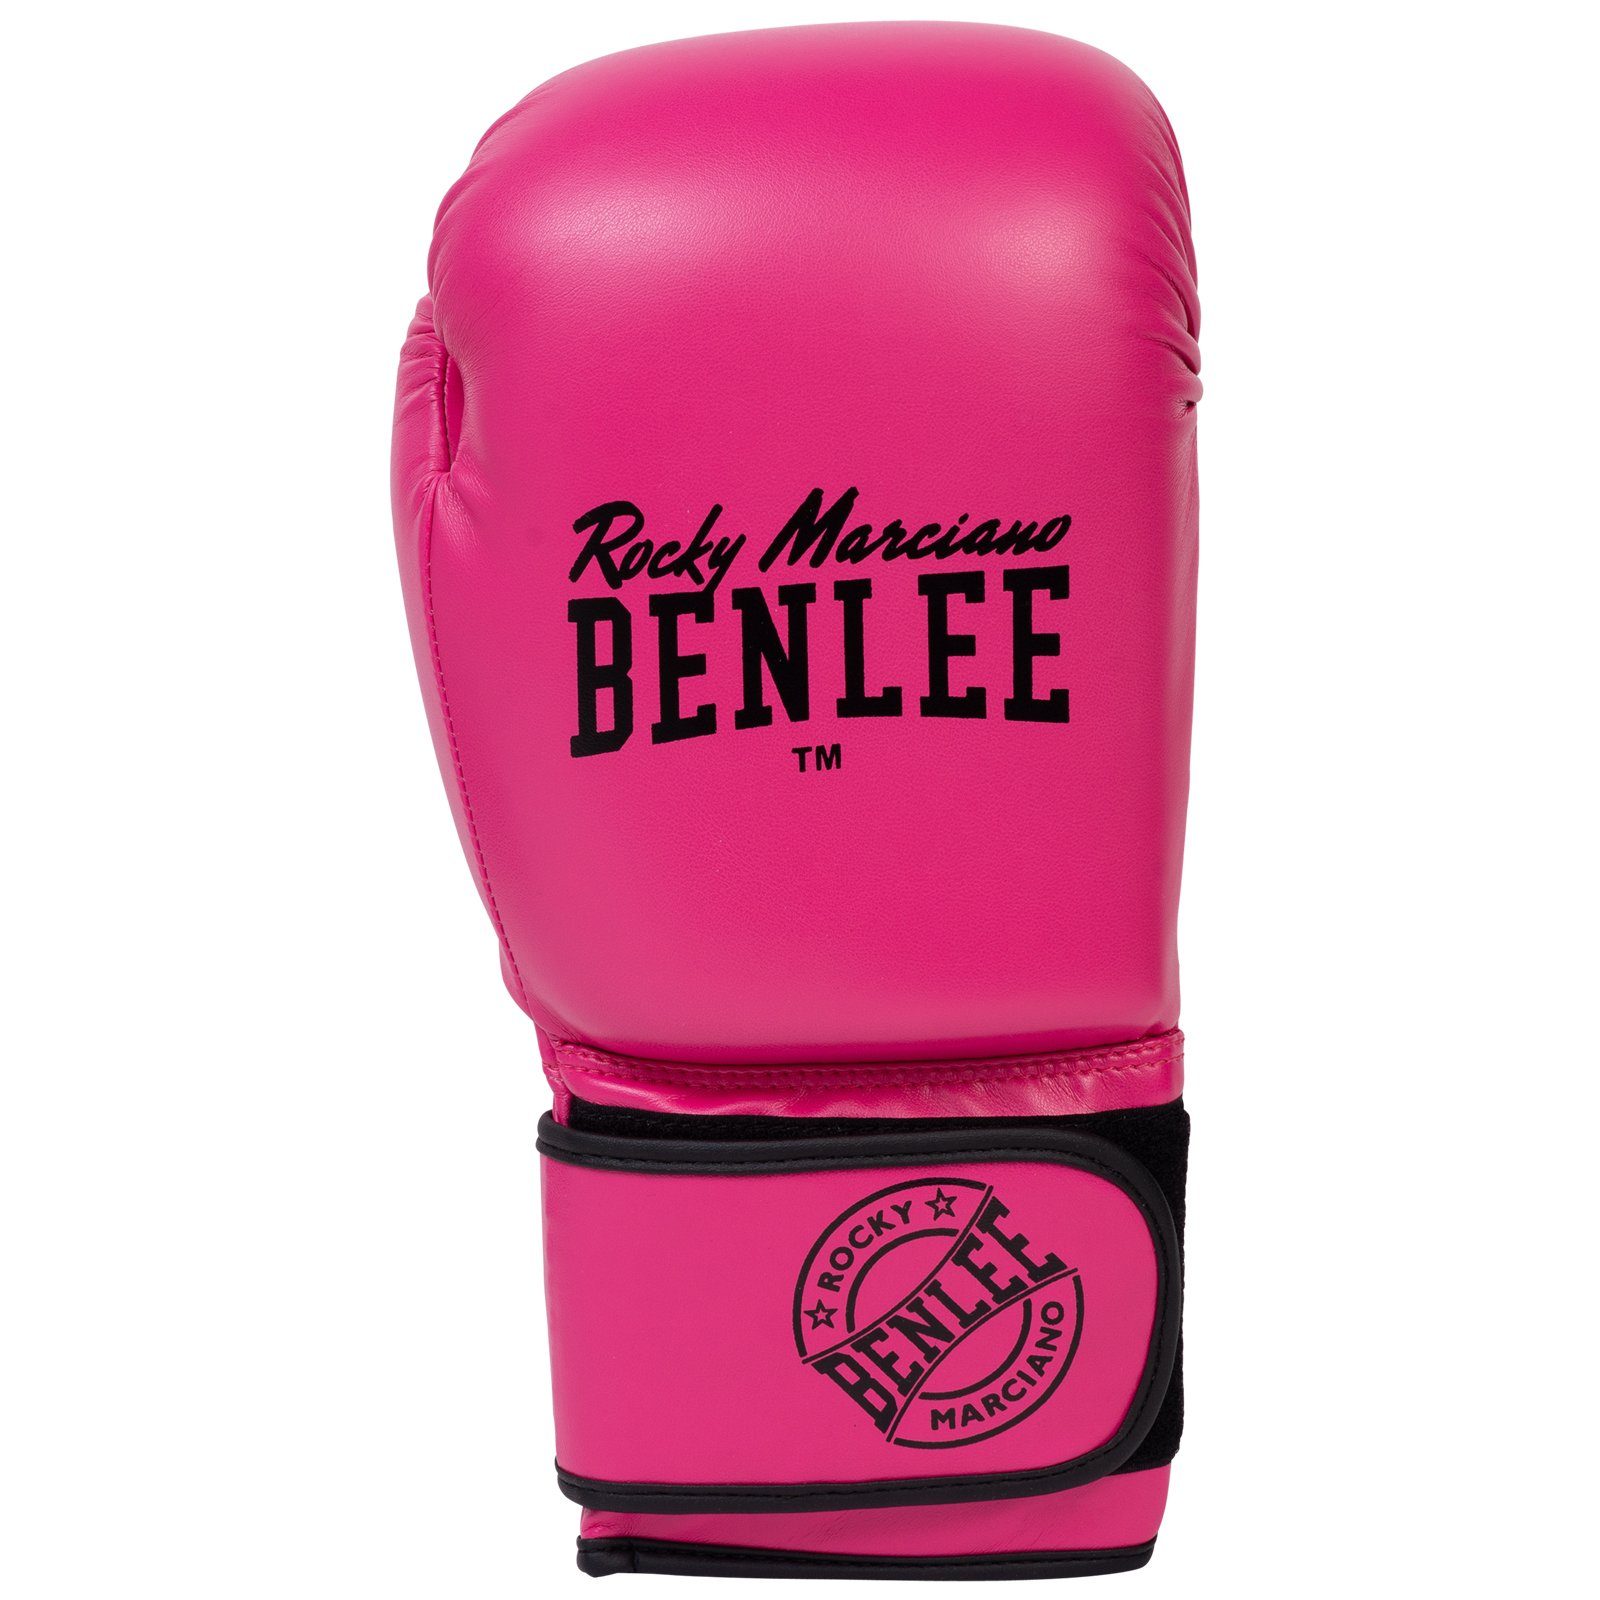 CARLOS Pink Boxhandschuhe Marciano Rocky Benlee